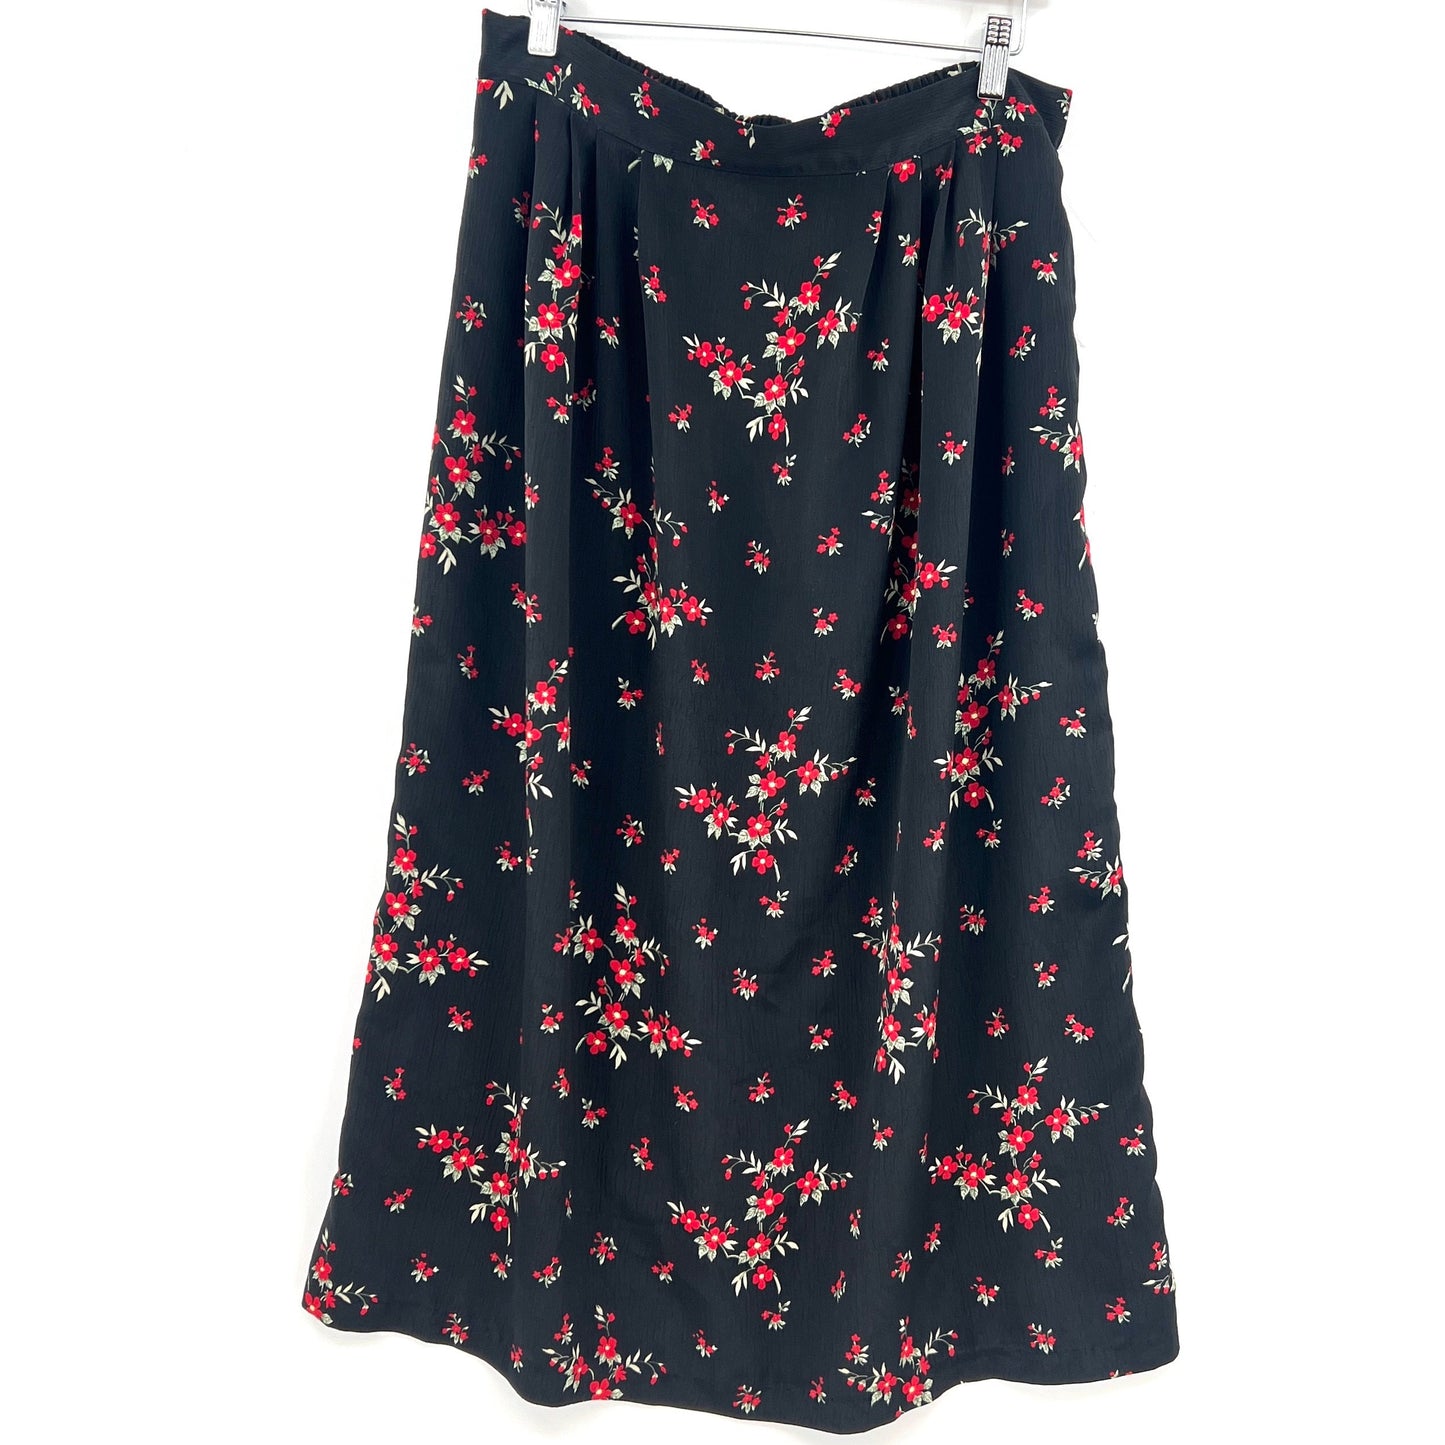 SOLD. Vintage Truly Classic Floral Maxi Skirt L